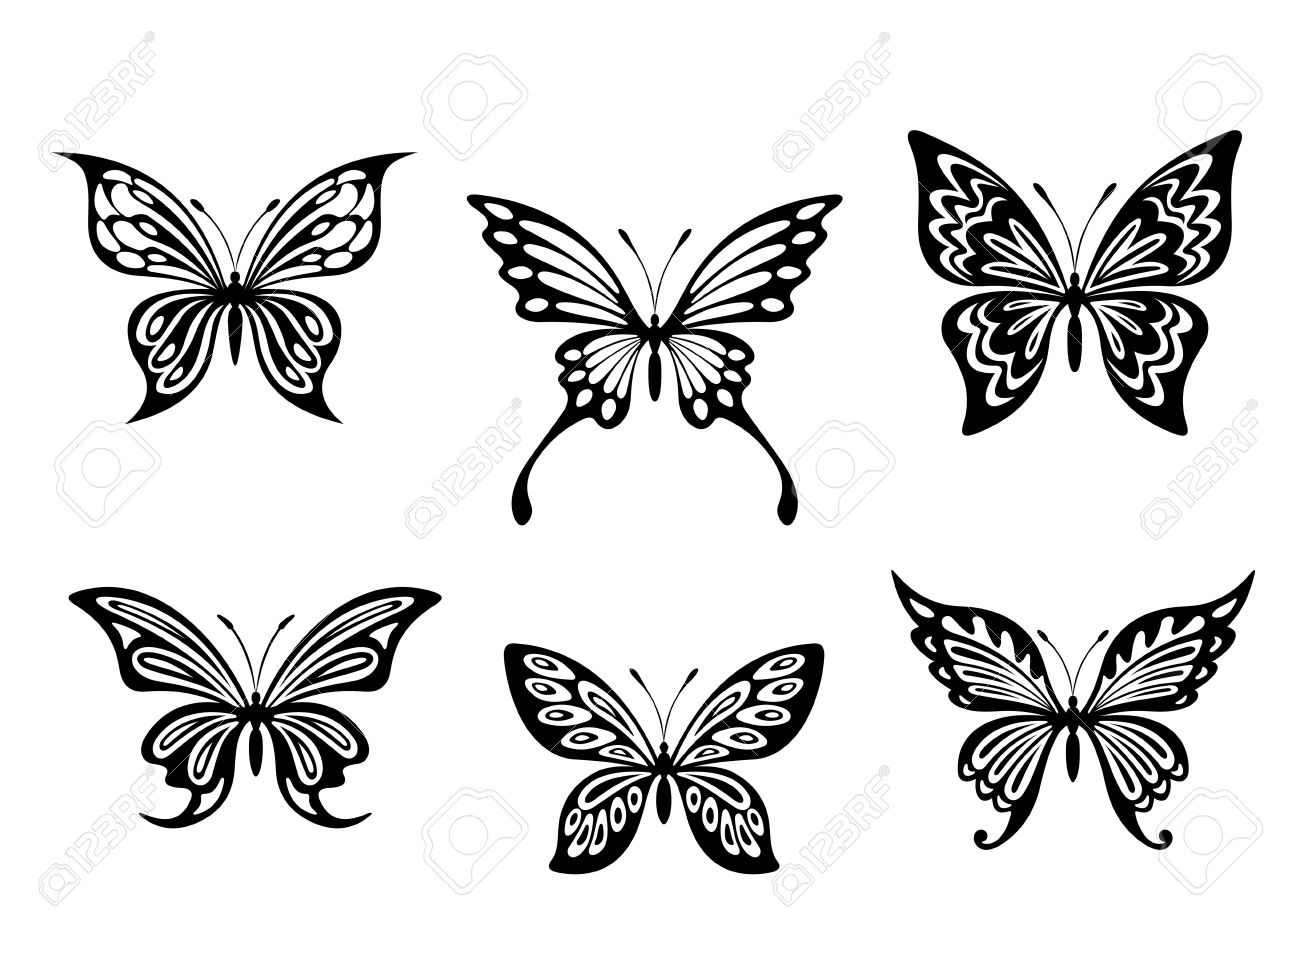 Black Butterfly Tattoos And Silhouettes Isolated On White Background with regard to measurements 1300 X 969